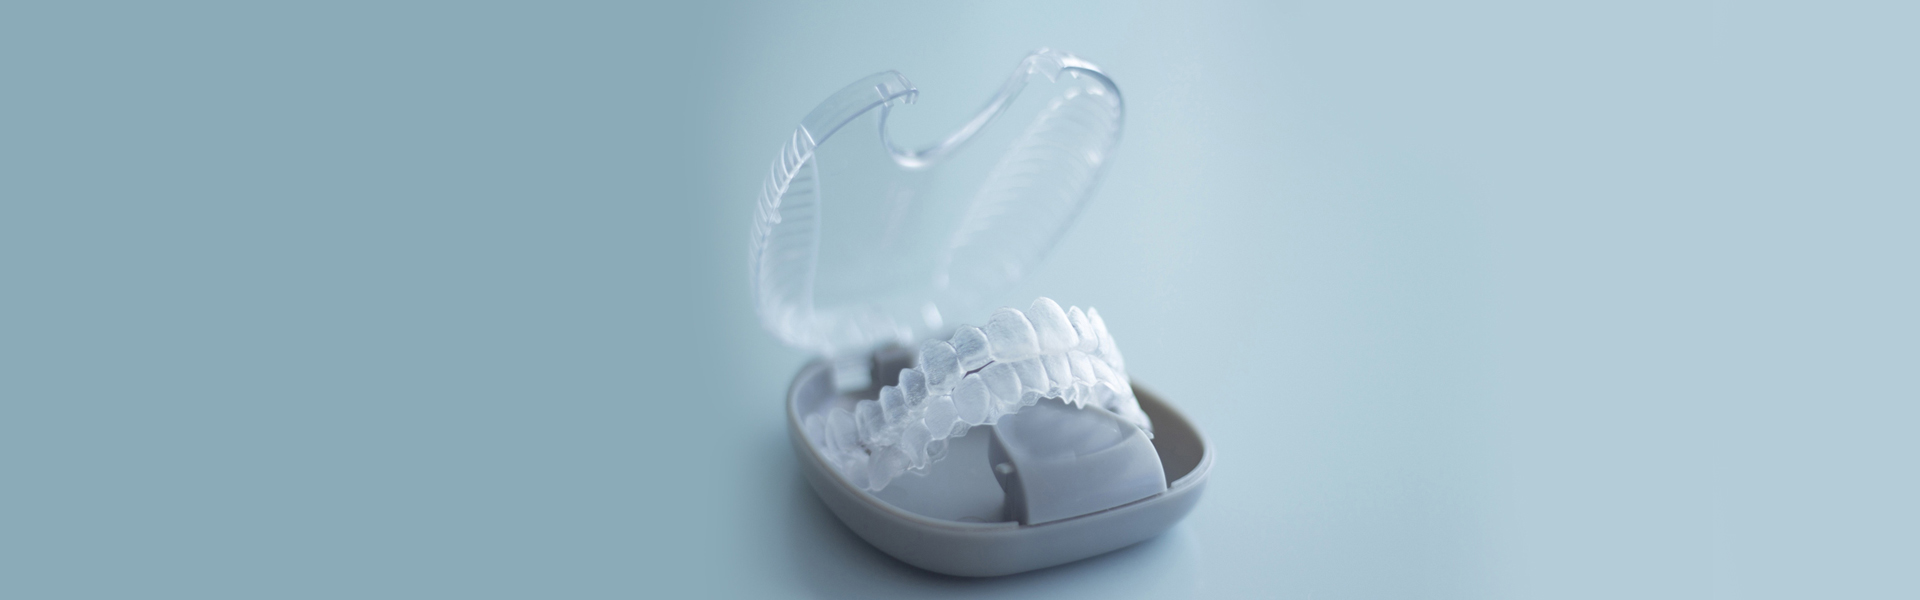 How To Straighten Your Teeth With Invisible Braces- Things To Know About Invisalign.